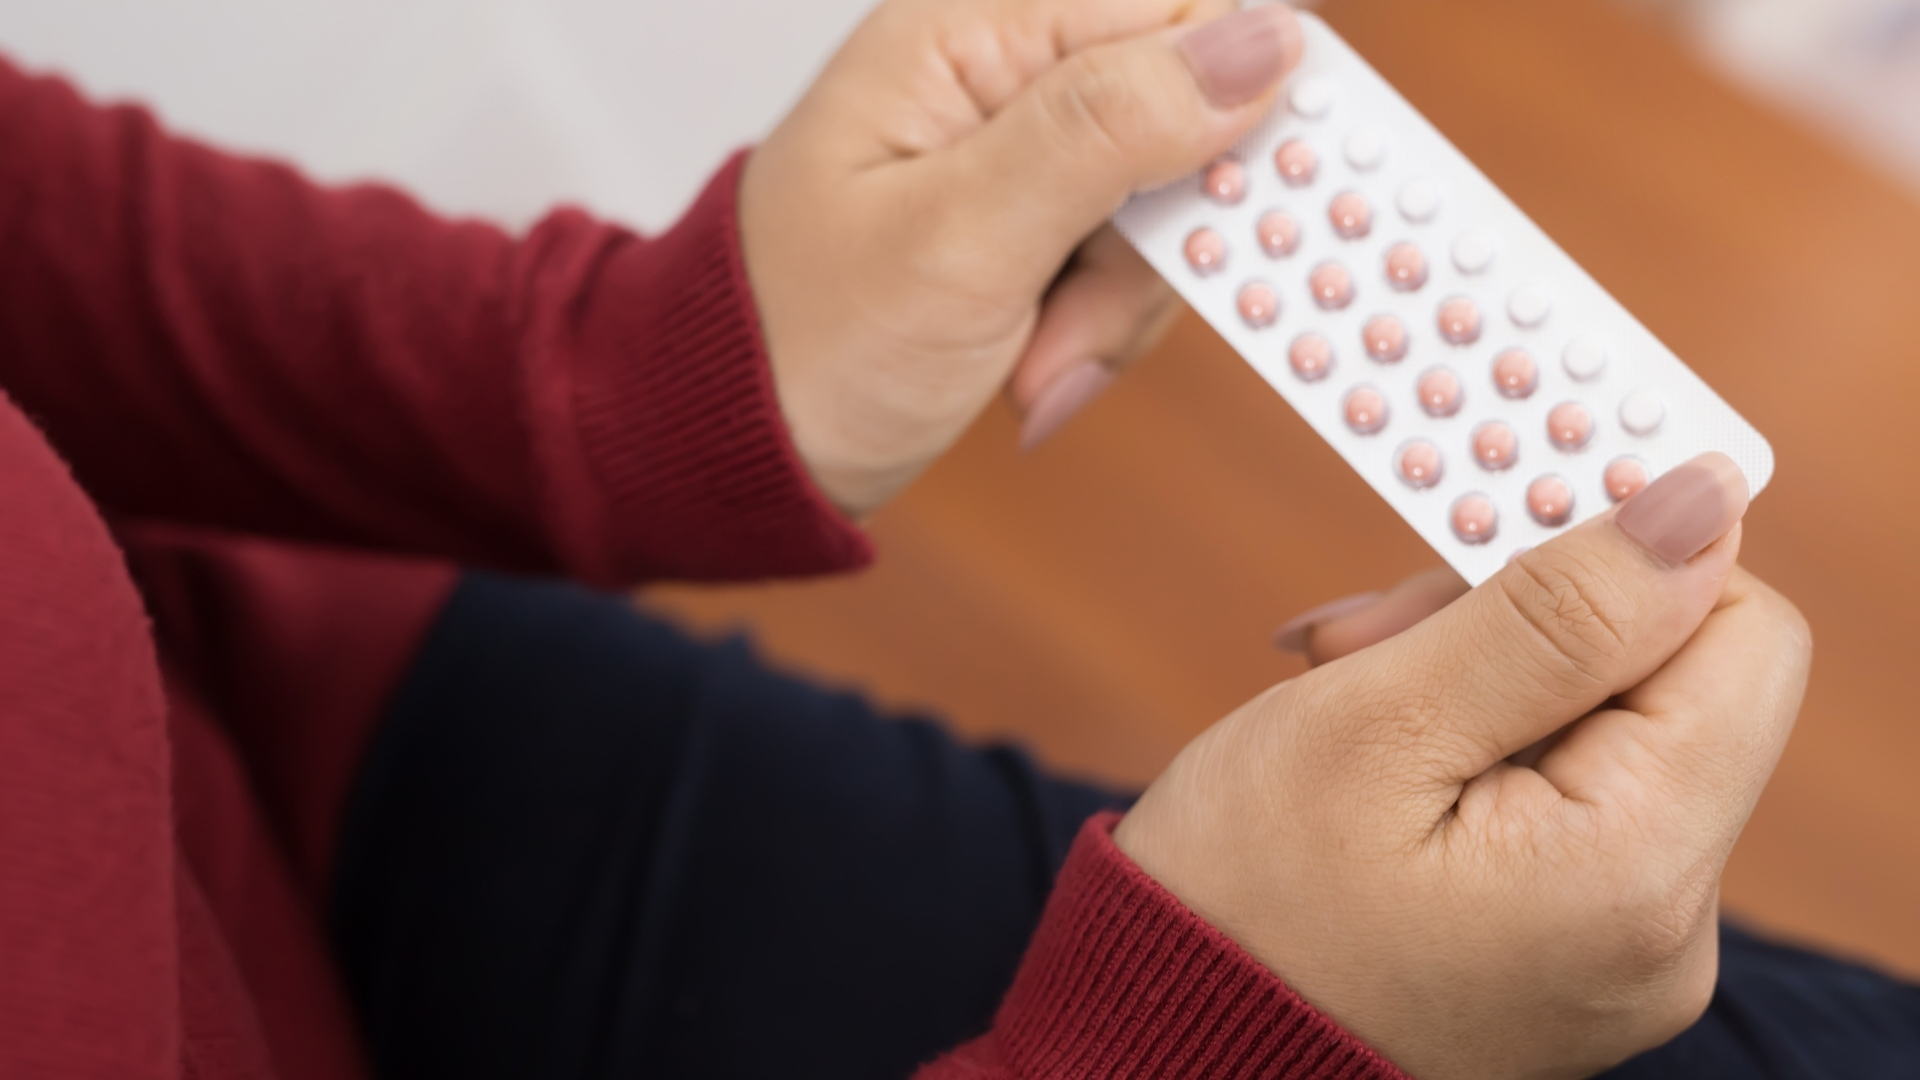 Stopping Birth Control: 6 Side Effects and Other Facts